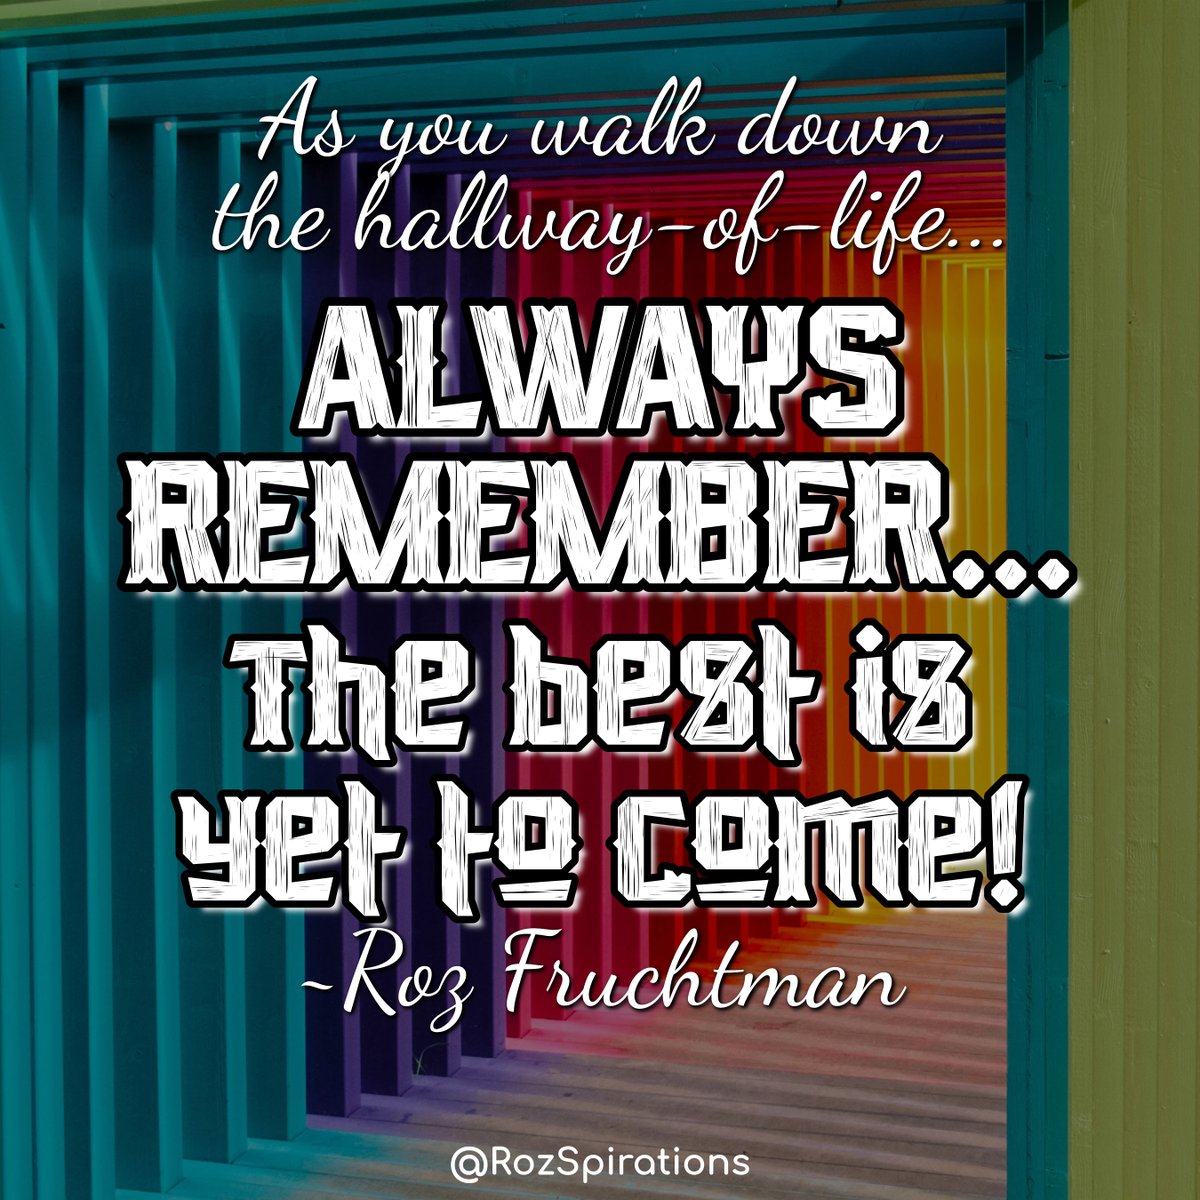 As you walk down the hallway-of-life... ALWAYS REMEMBER... The best is yet to come! ~Roz Fruchtman #ThinkBIGSundayWithMarsha #RozSpirations #joytrain #lovetrain #qotd IT'S NEVER TOO LATE!